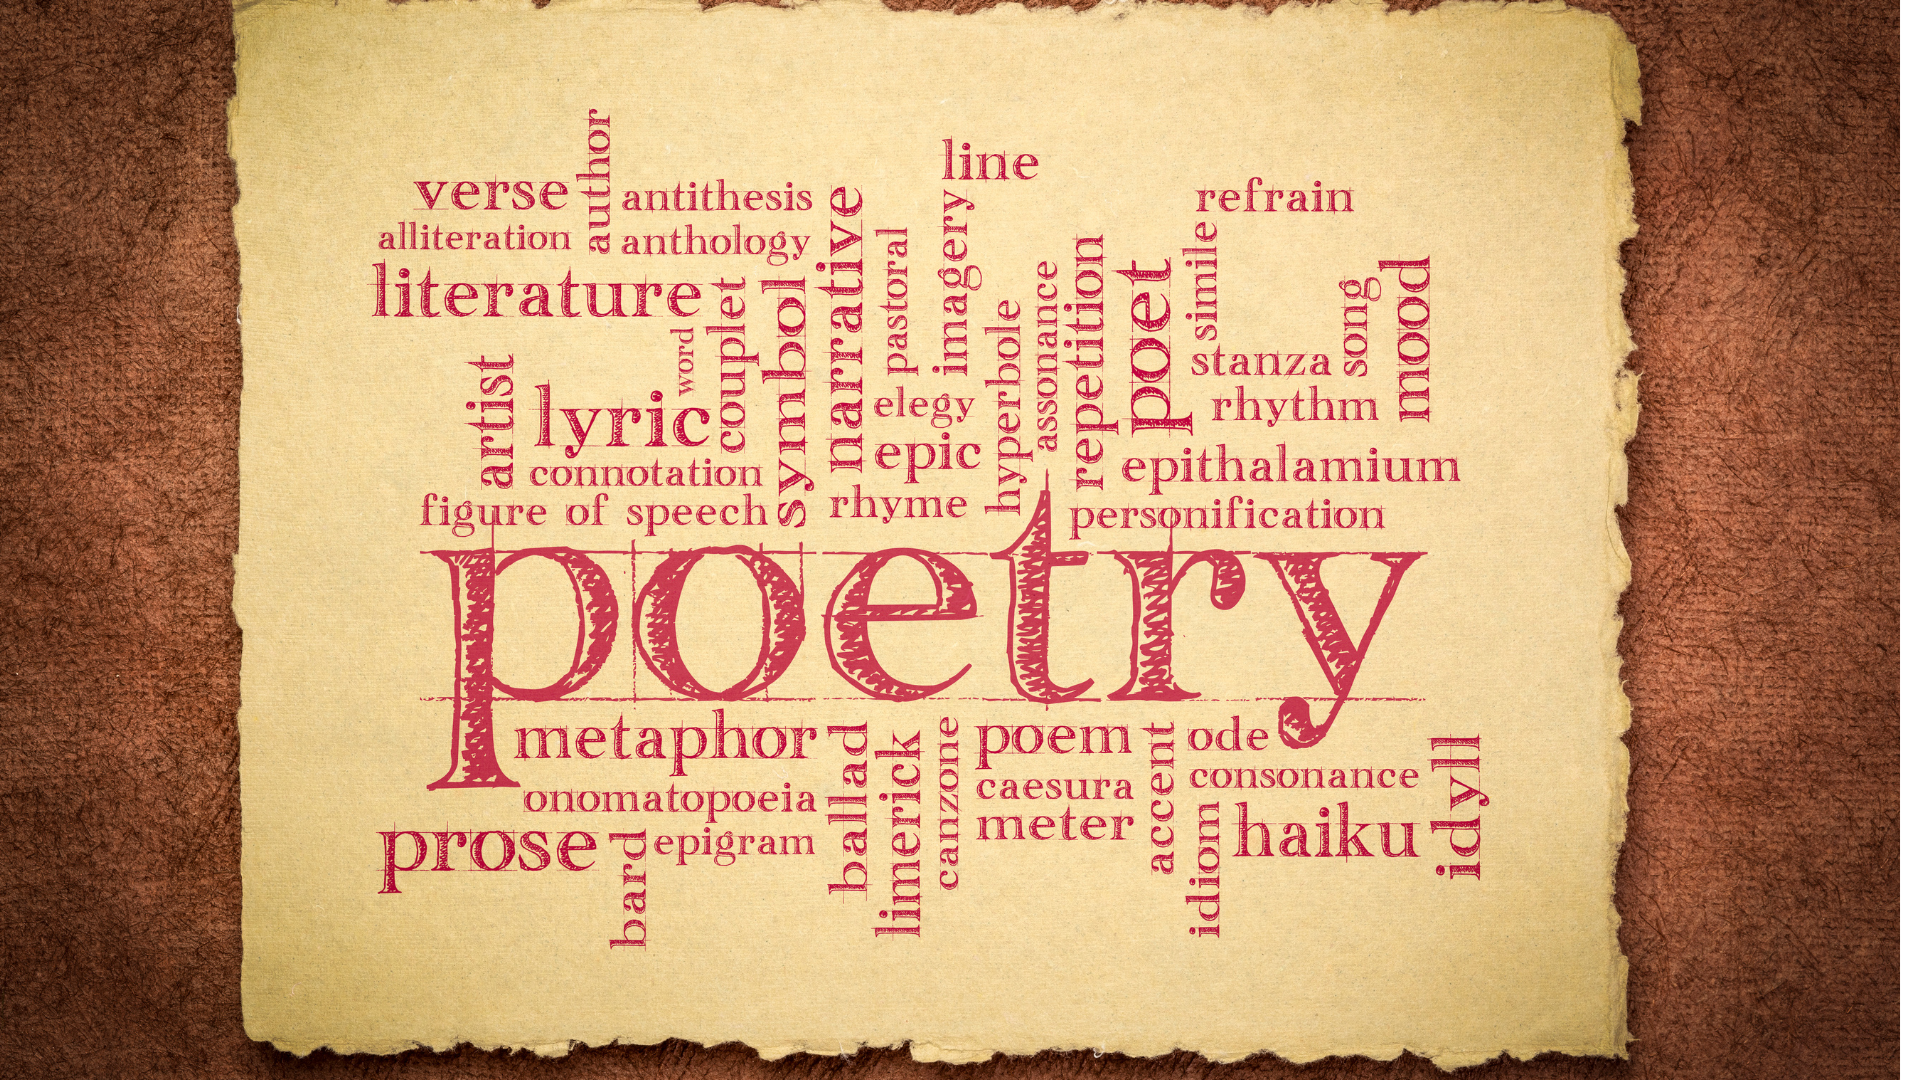 word cloud with the word Poetry at the center